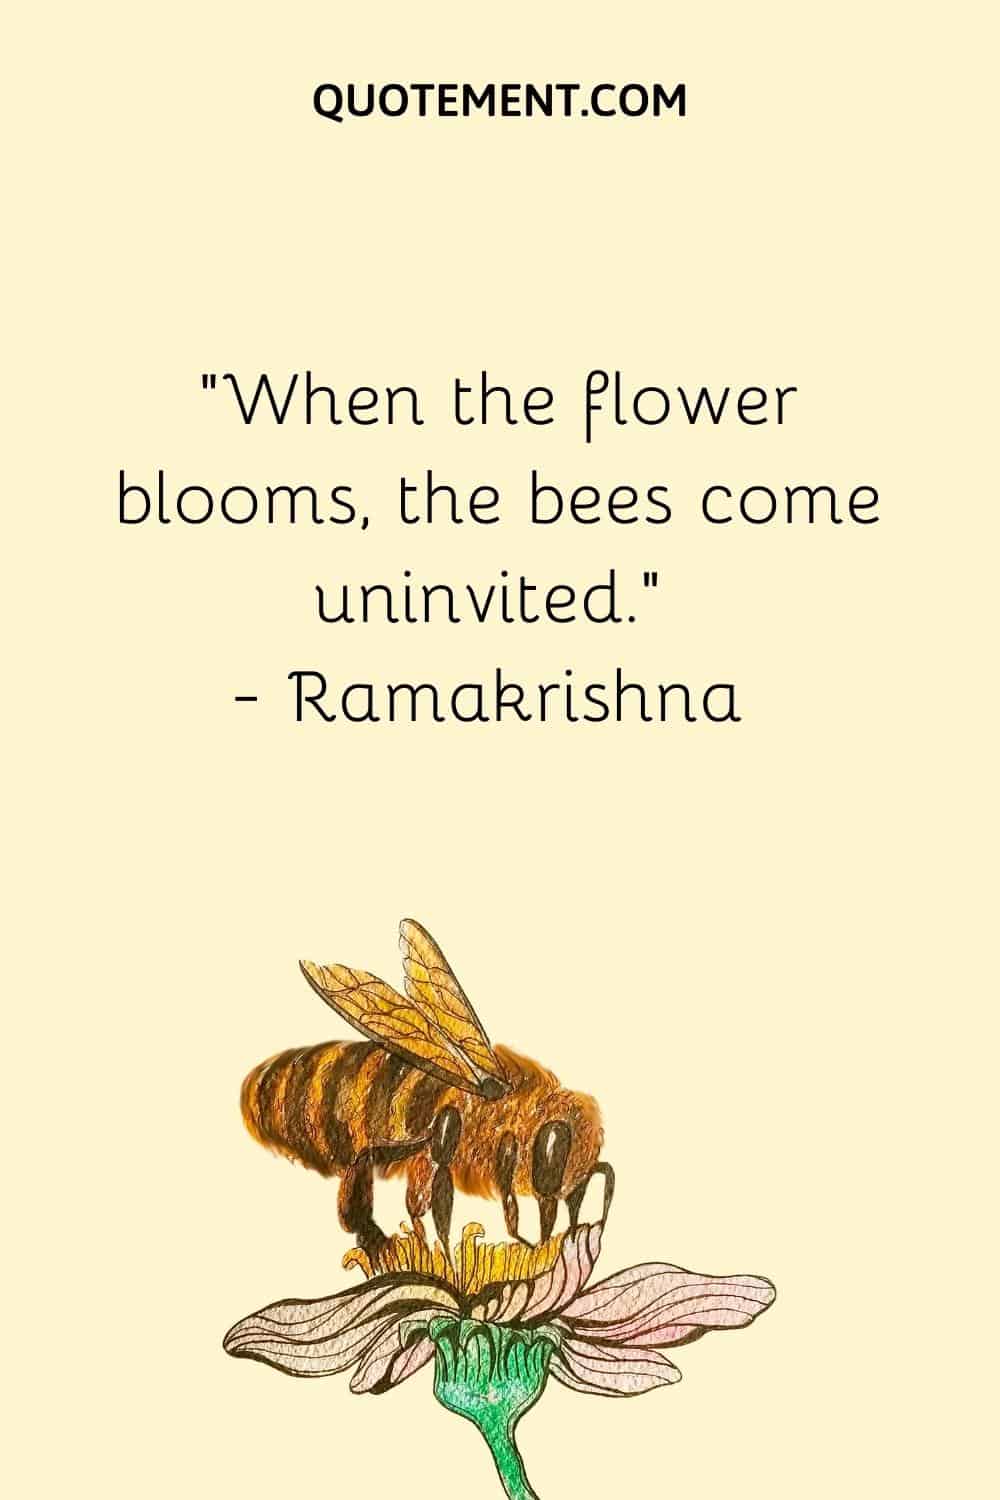 When the flower blooms, the bees come uninvited. — Ramakrishna